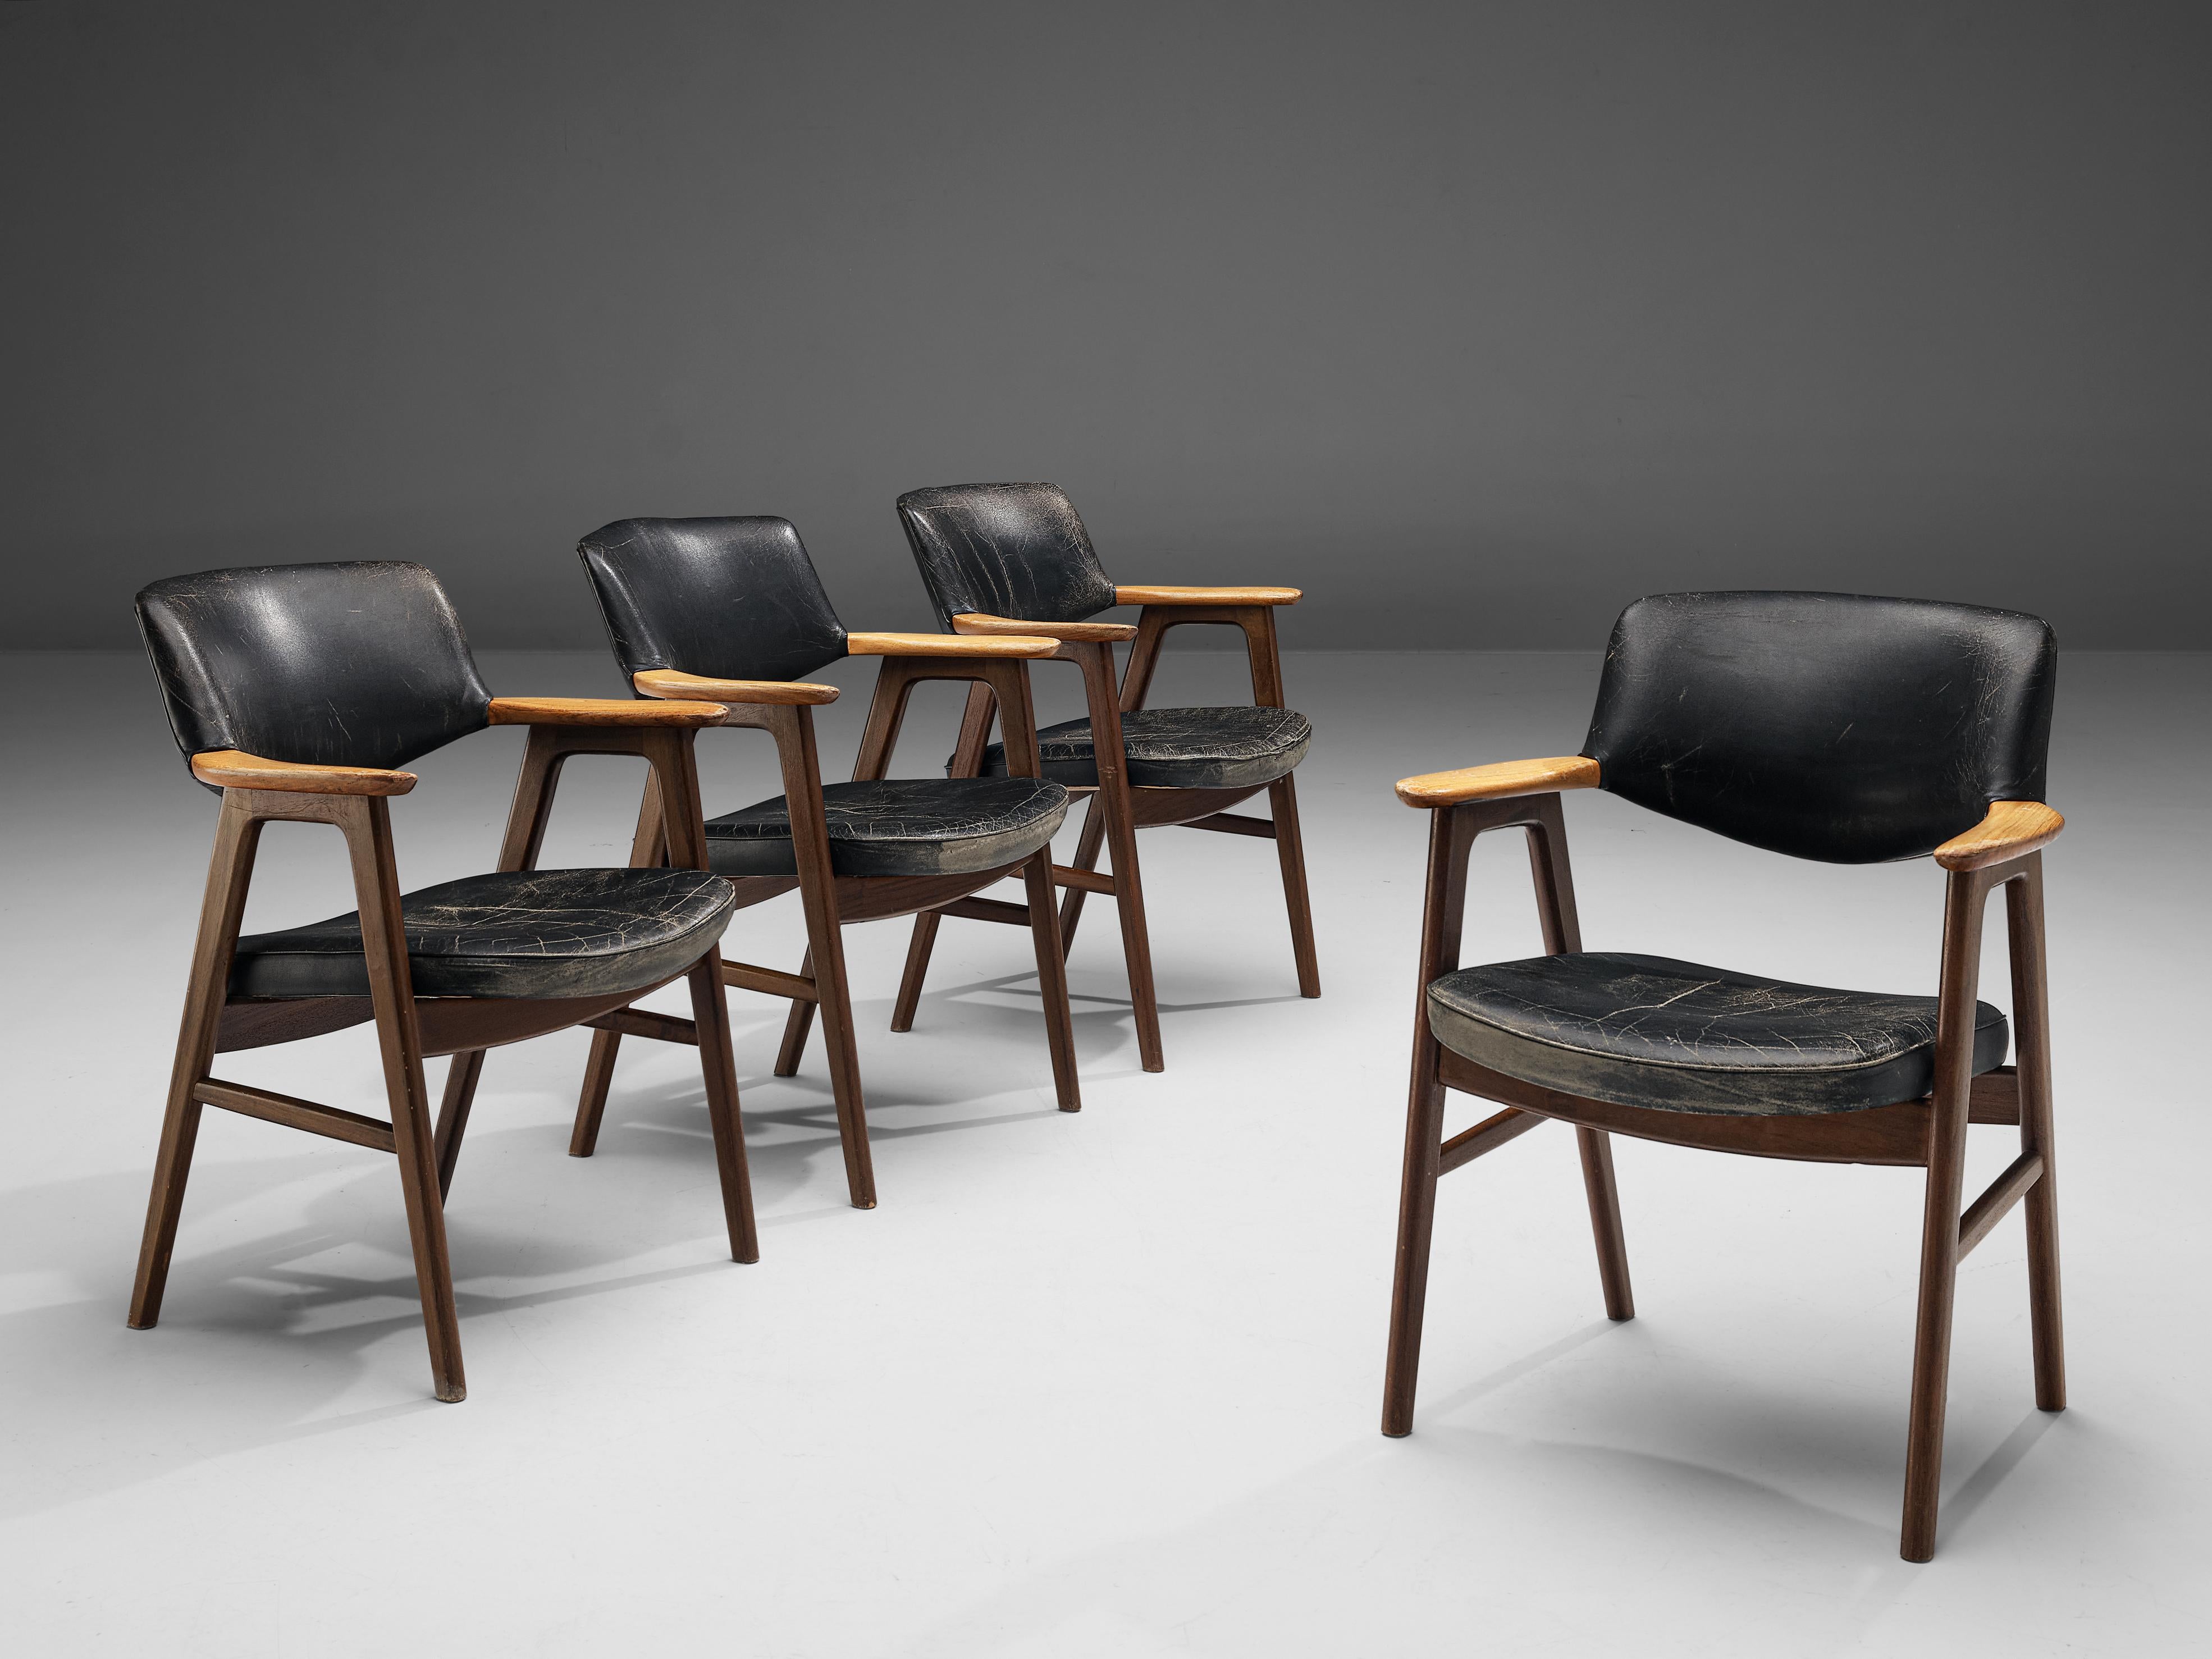 Erik Kirkegaard for Høng Stolefabrik, armchairs model '53', teak, rosewood, leather, Denmark, designed in 1956 

Very comfortable dining chairs, due to well-shaped armrests and ergonomic proportions of the back and seat by Erik Kirkegaard for Høng